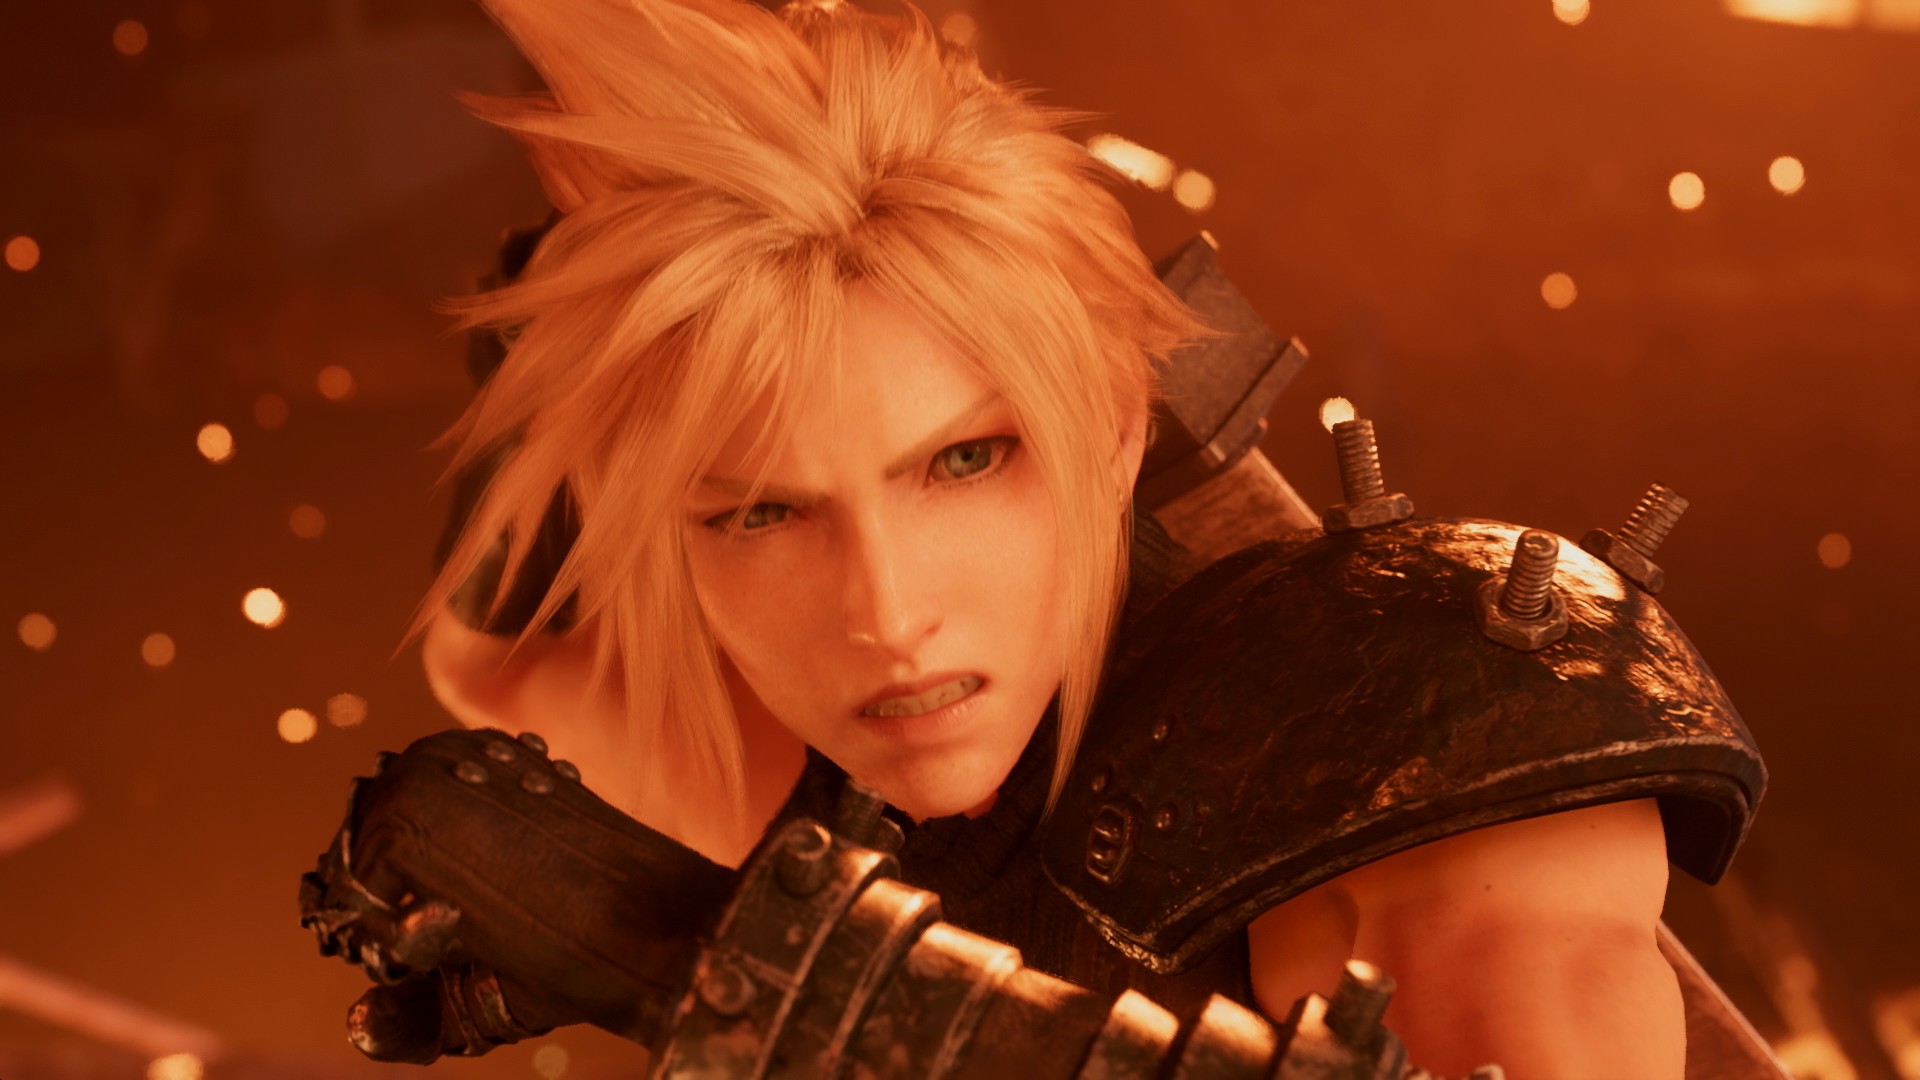 FF7, Final Fantasy 7 Remake, FF 7 Remake, Final Fantasy, Final Fantasy VII Remake, Square Enix, PS4, PlayStation 4, release date, gameplay, features, price, pre-order, Japan, Europe, US, North America, Australia